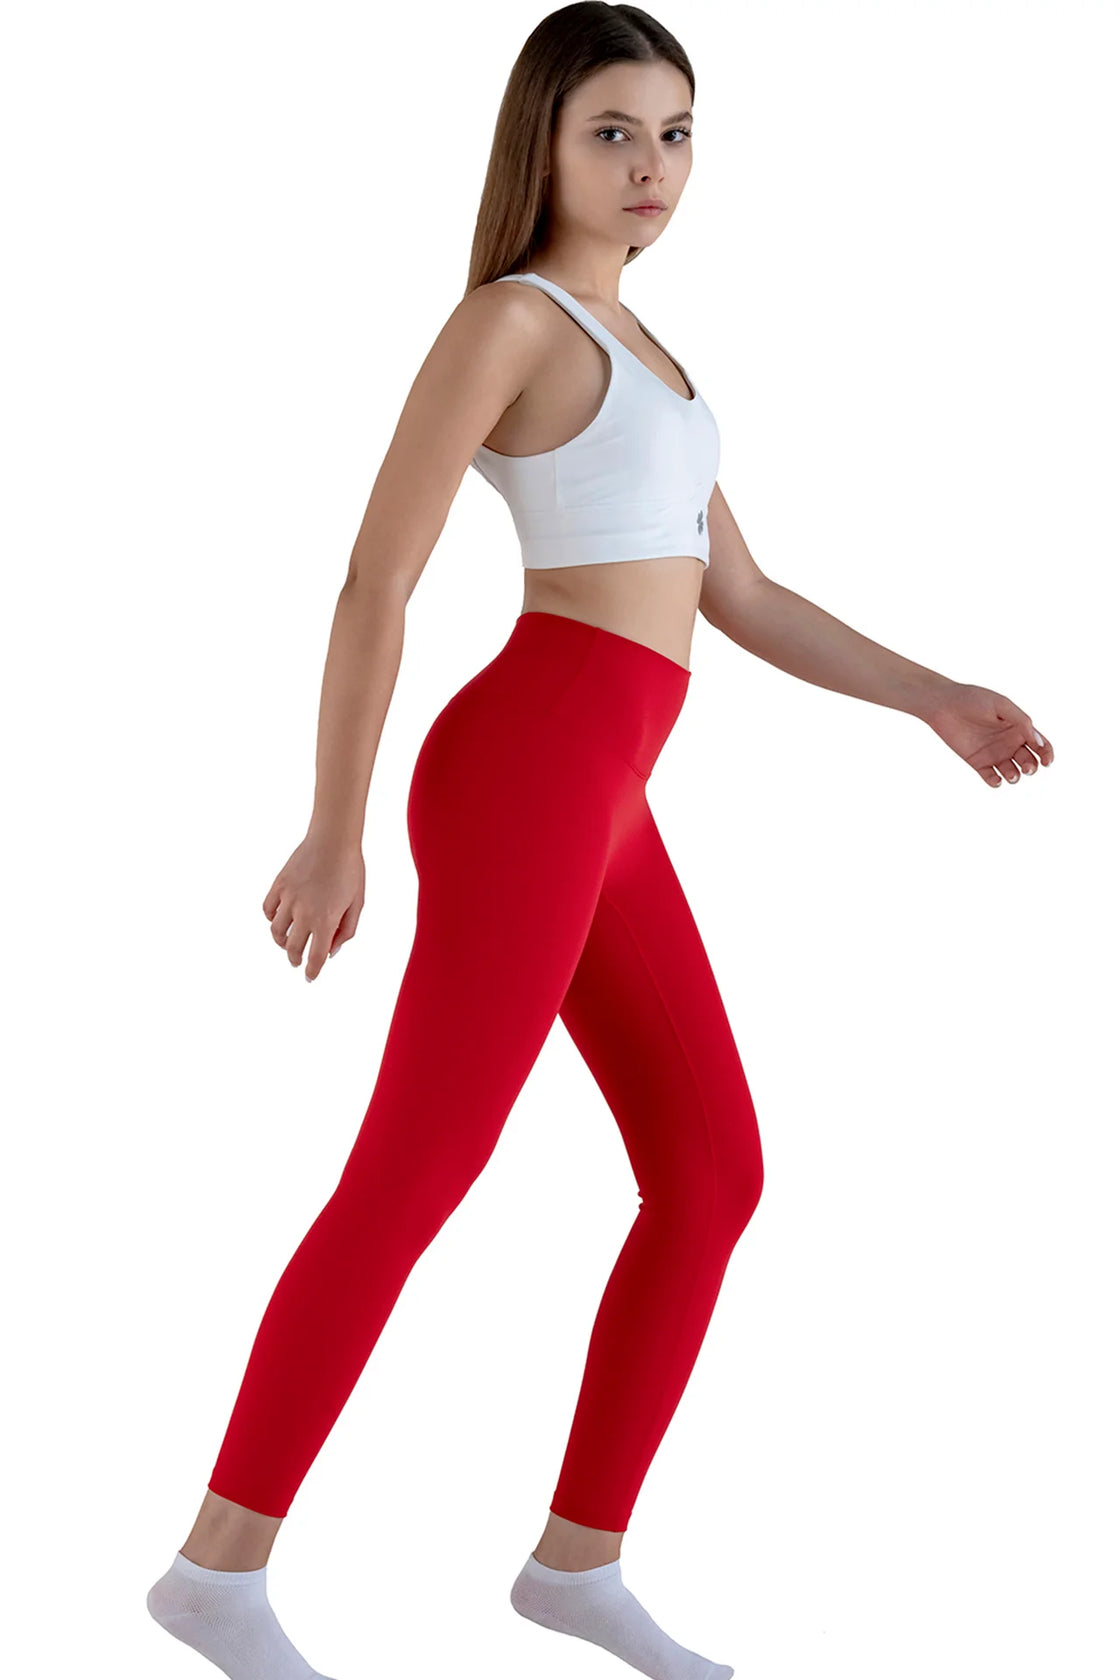 Red leggings for yoga and gym